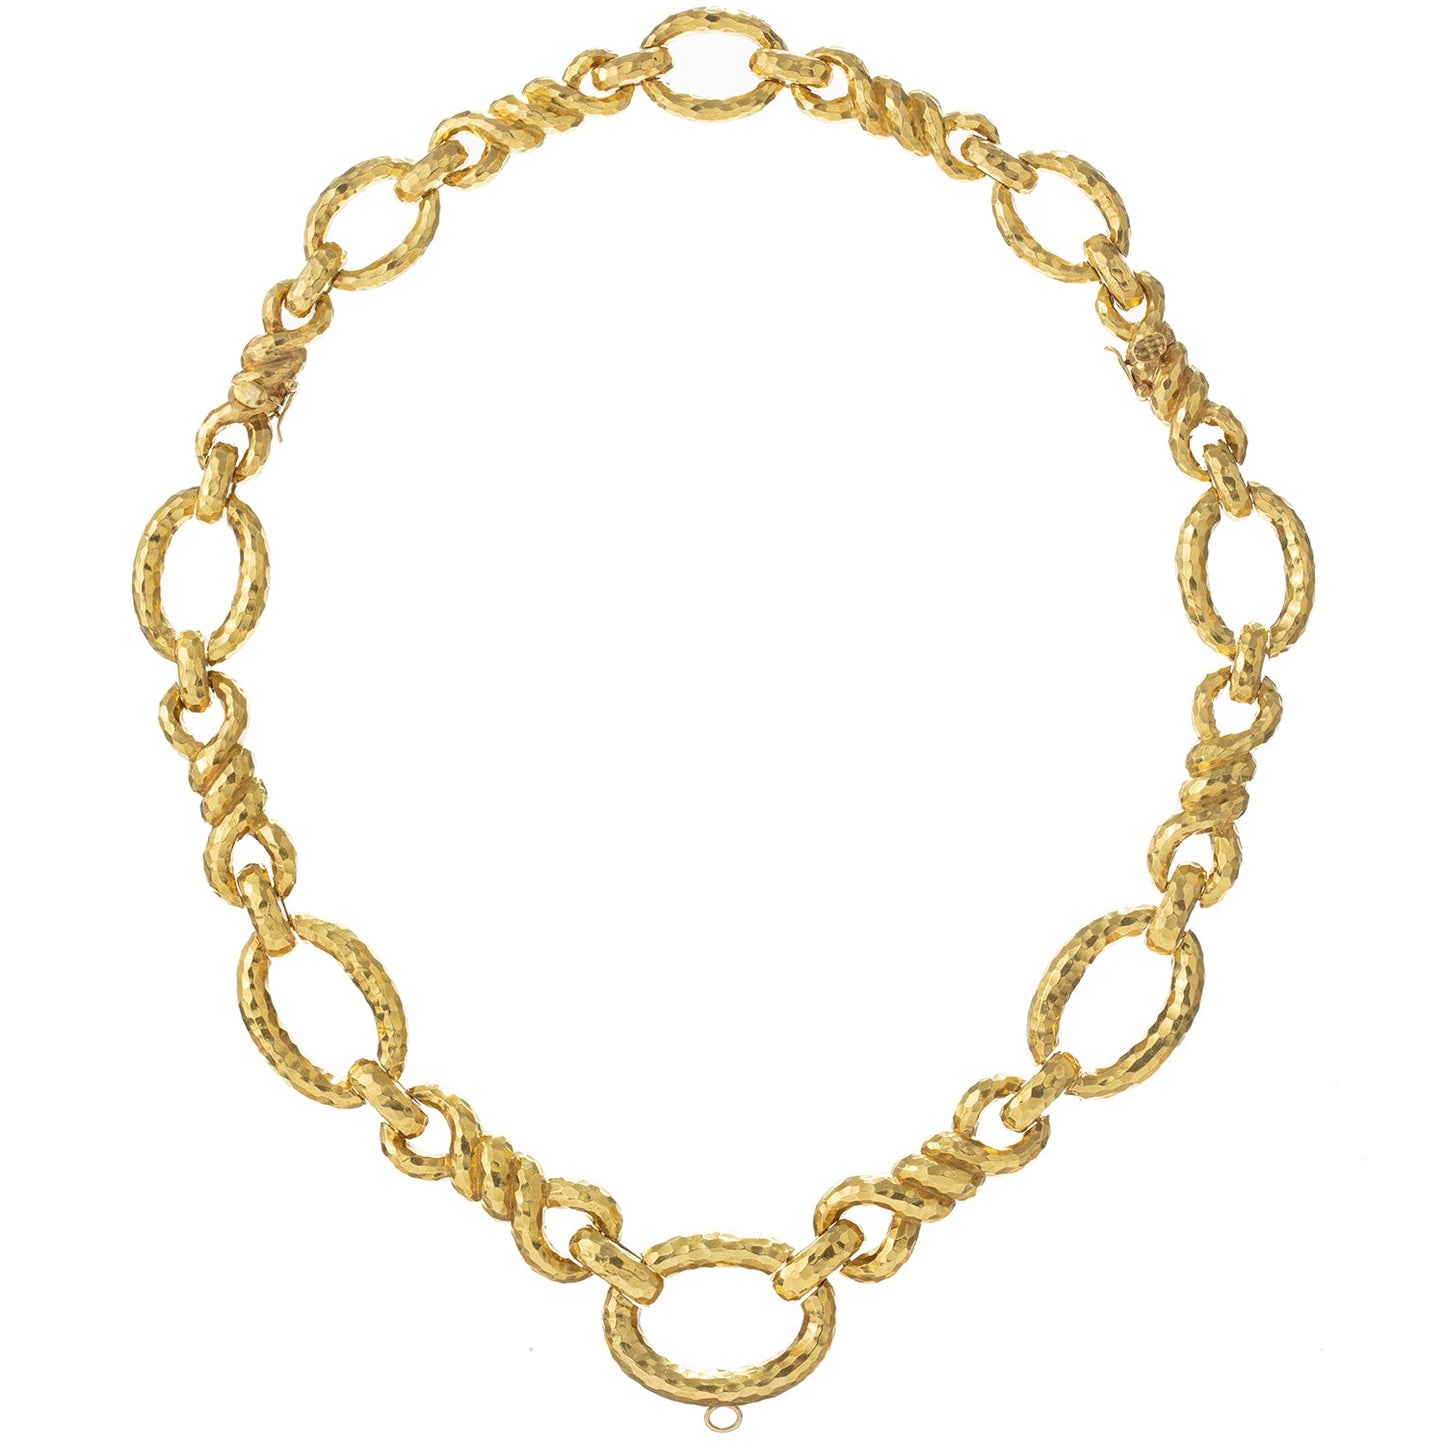 David Webb - Hammered 18k Yellow Gold Link Convertible Necklace